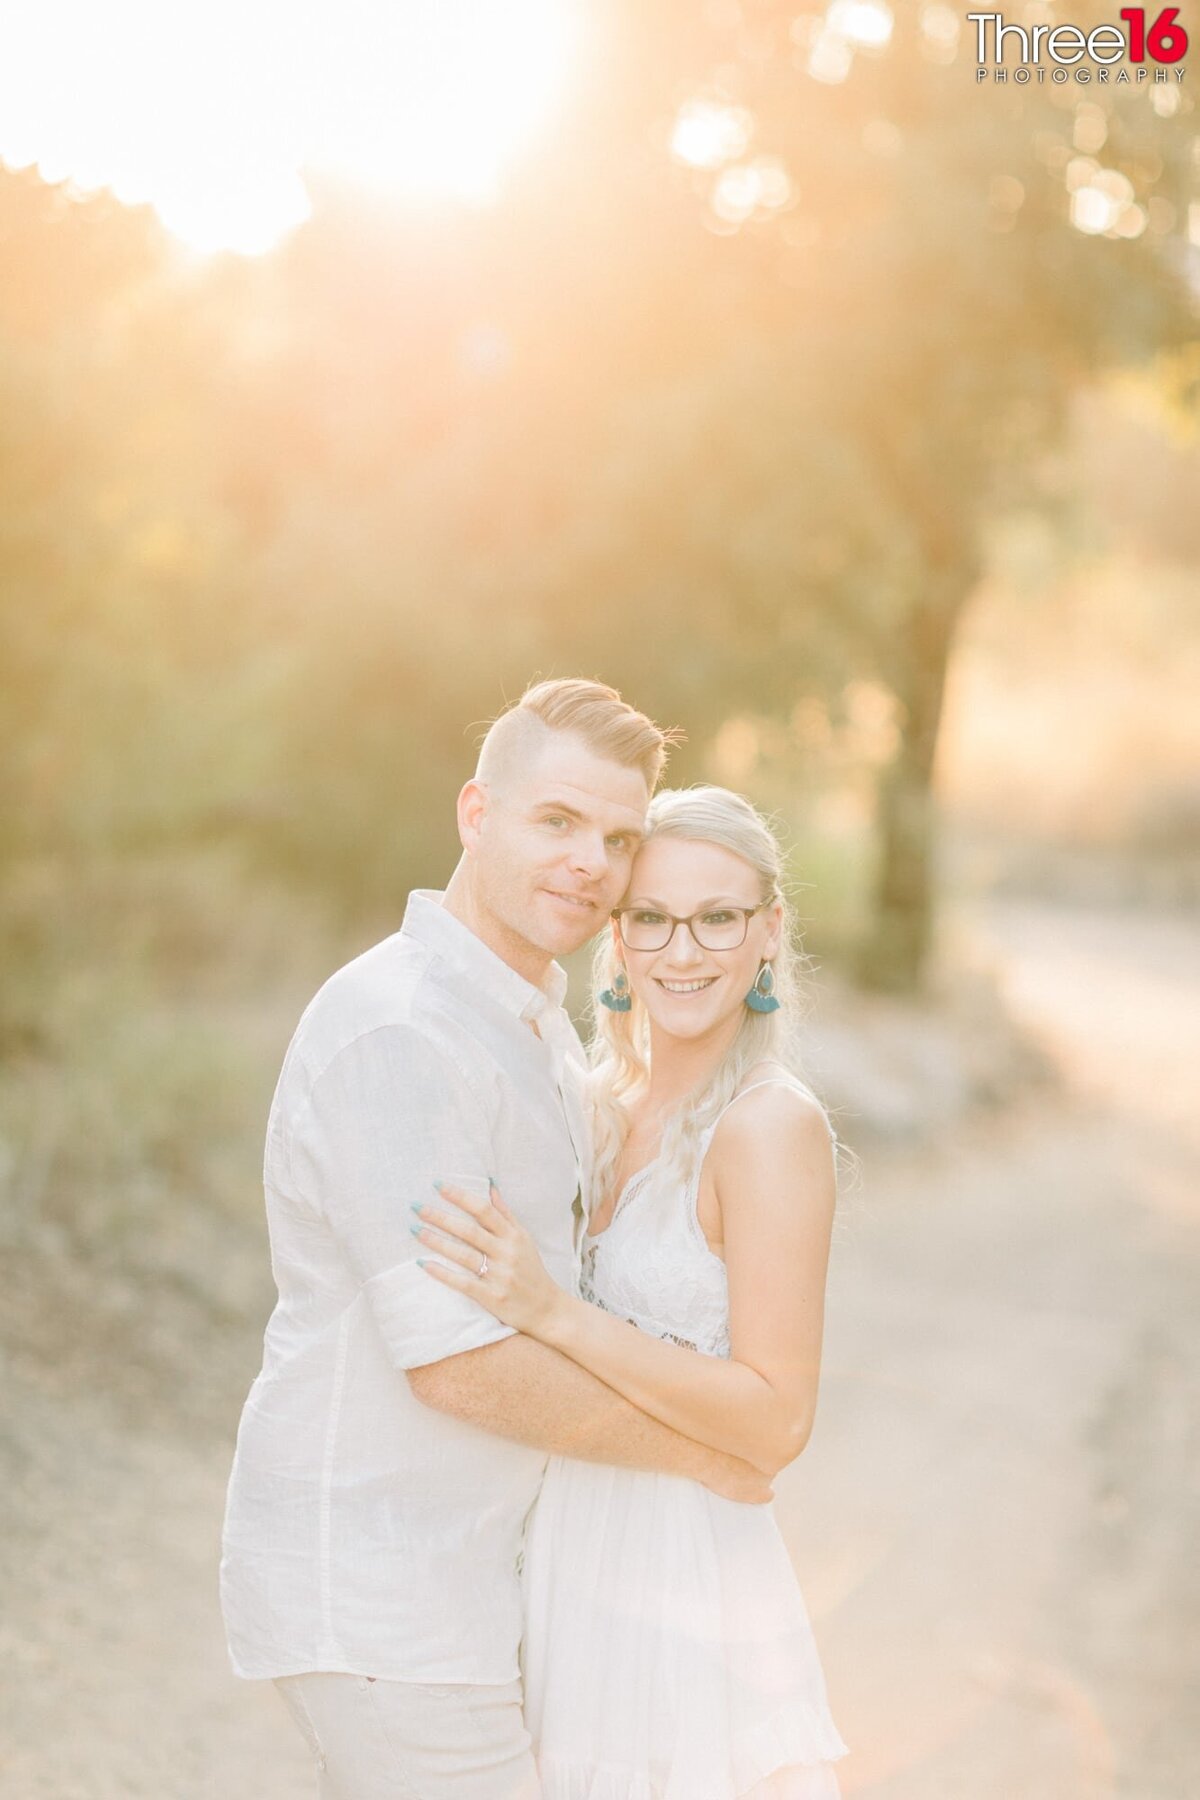 Whiting Ranch Wilderness Park Engagement Photos-1002